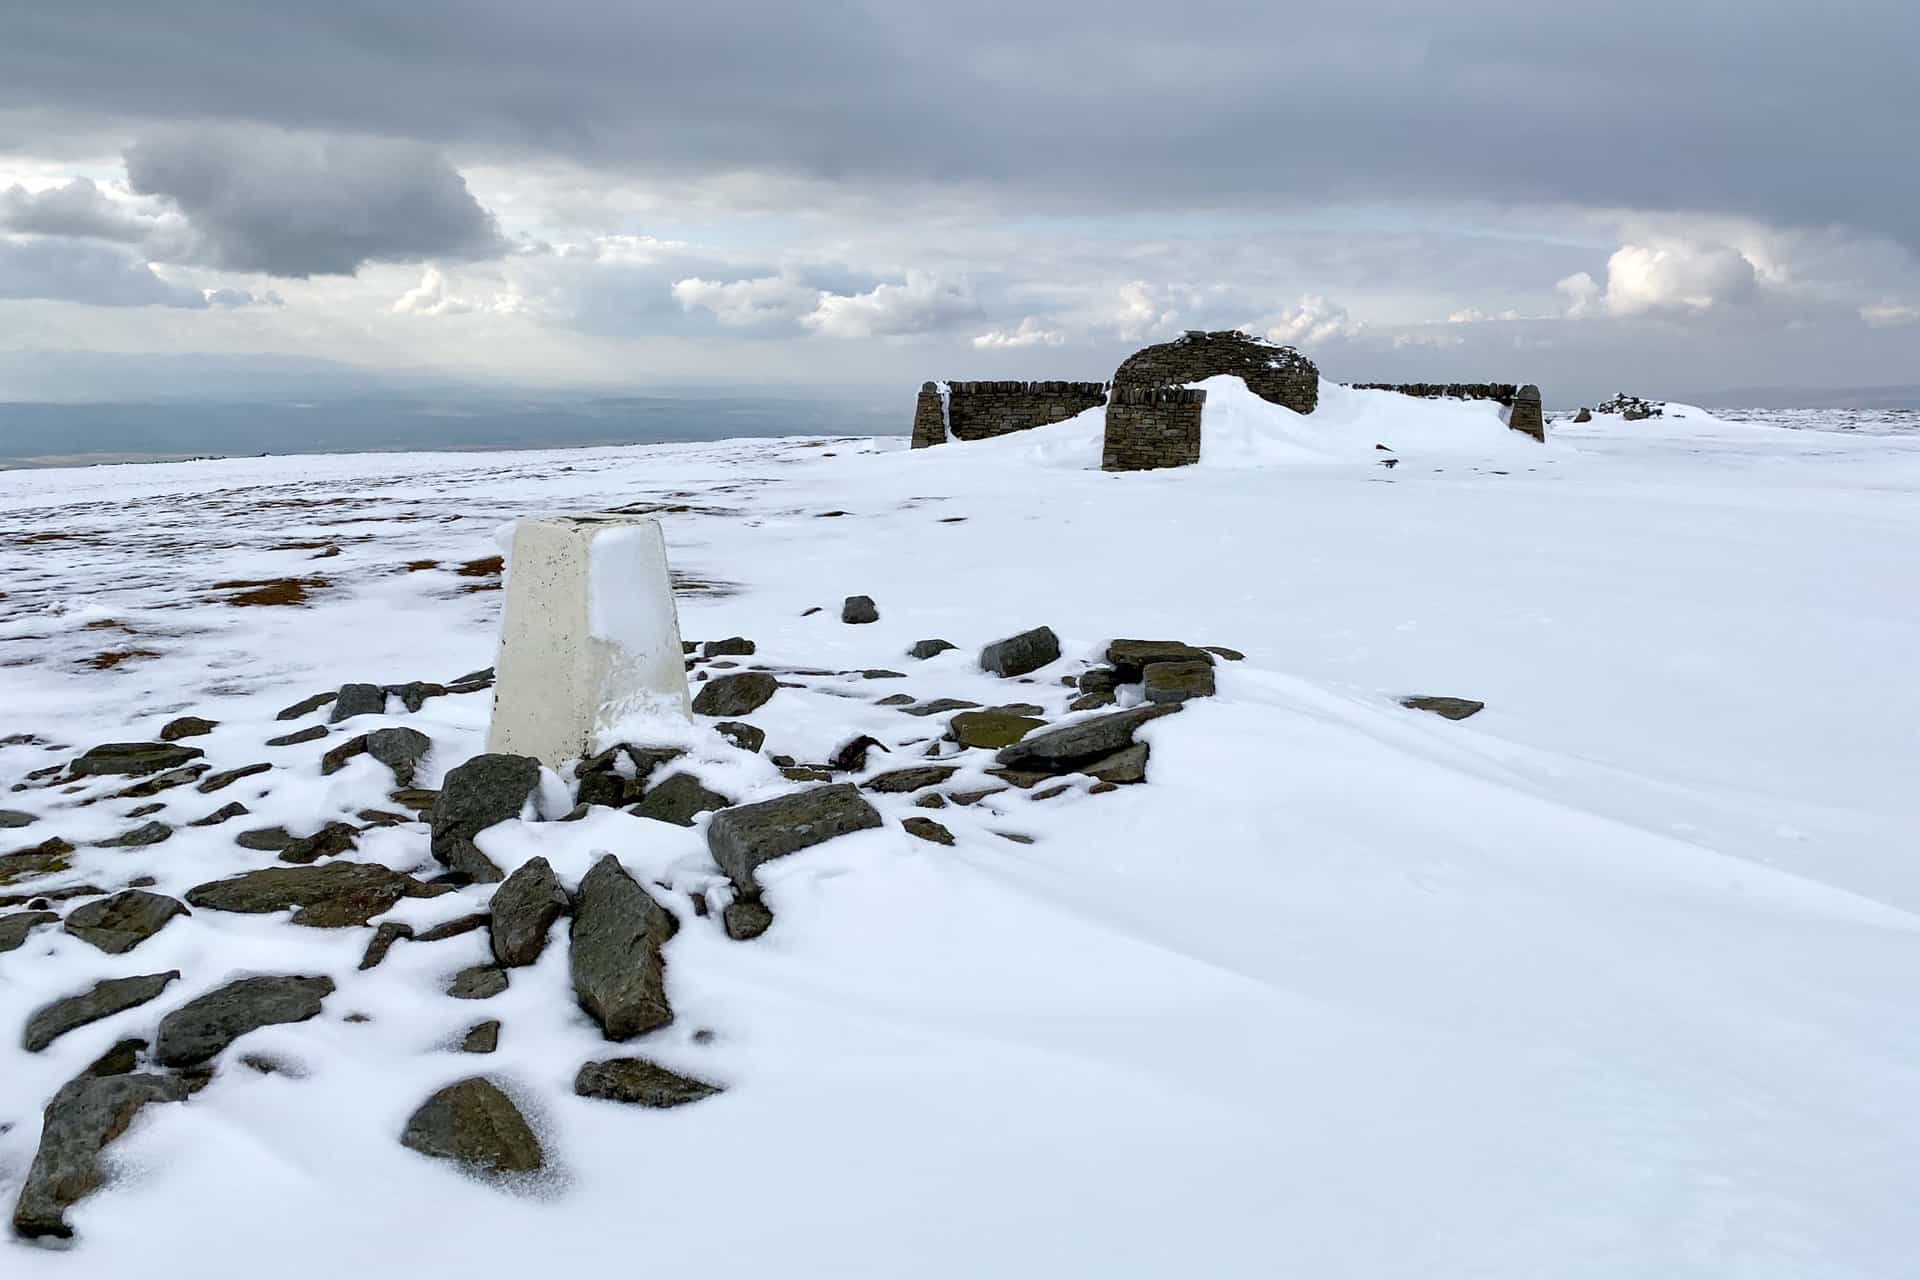 The summit of Cross Fell, height 893 metres (2930 feet). Cross Fell is the highest mountain in England outside the Lake District.